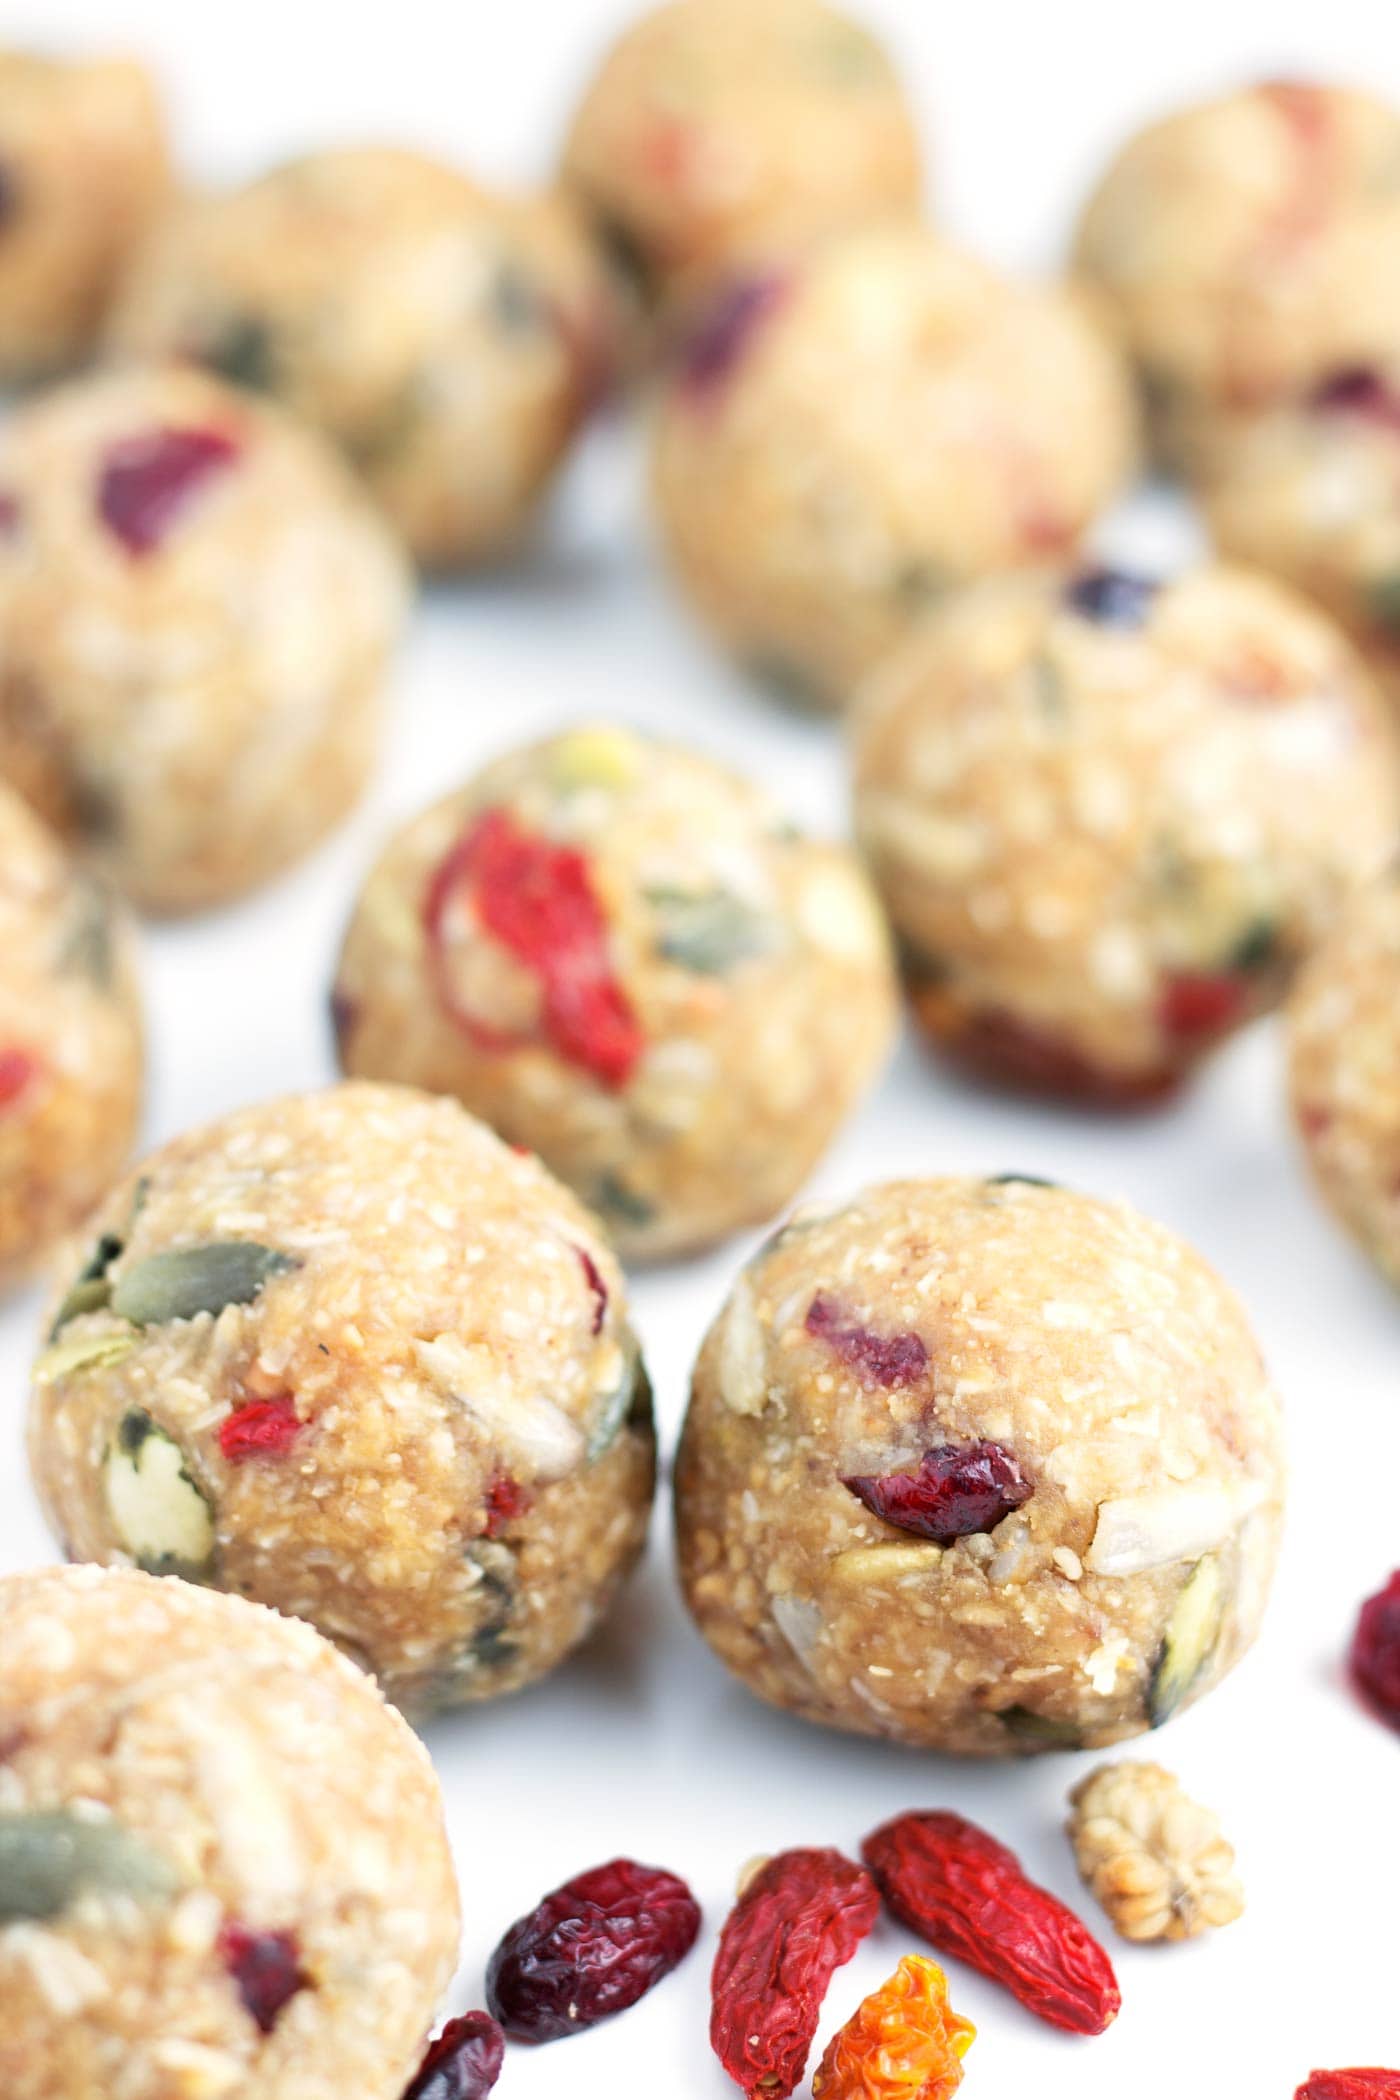 Perfect for a quick breakfast or snack! A mixture of oats, nuts, seeds, and berries, these no-bake breakfast bites are easy to make, gluten free, and vegan!